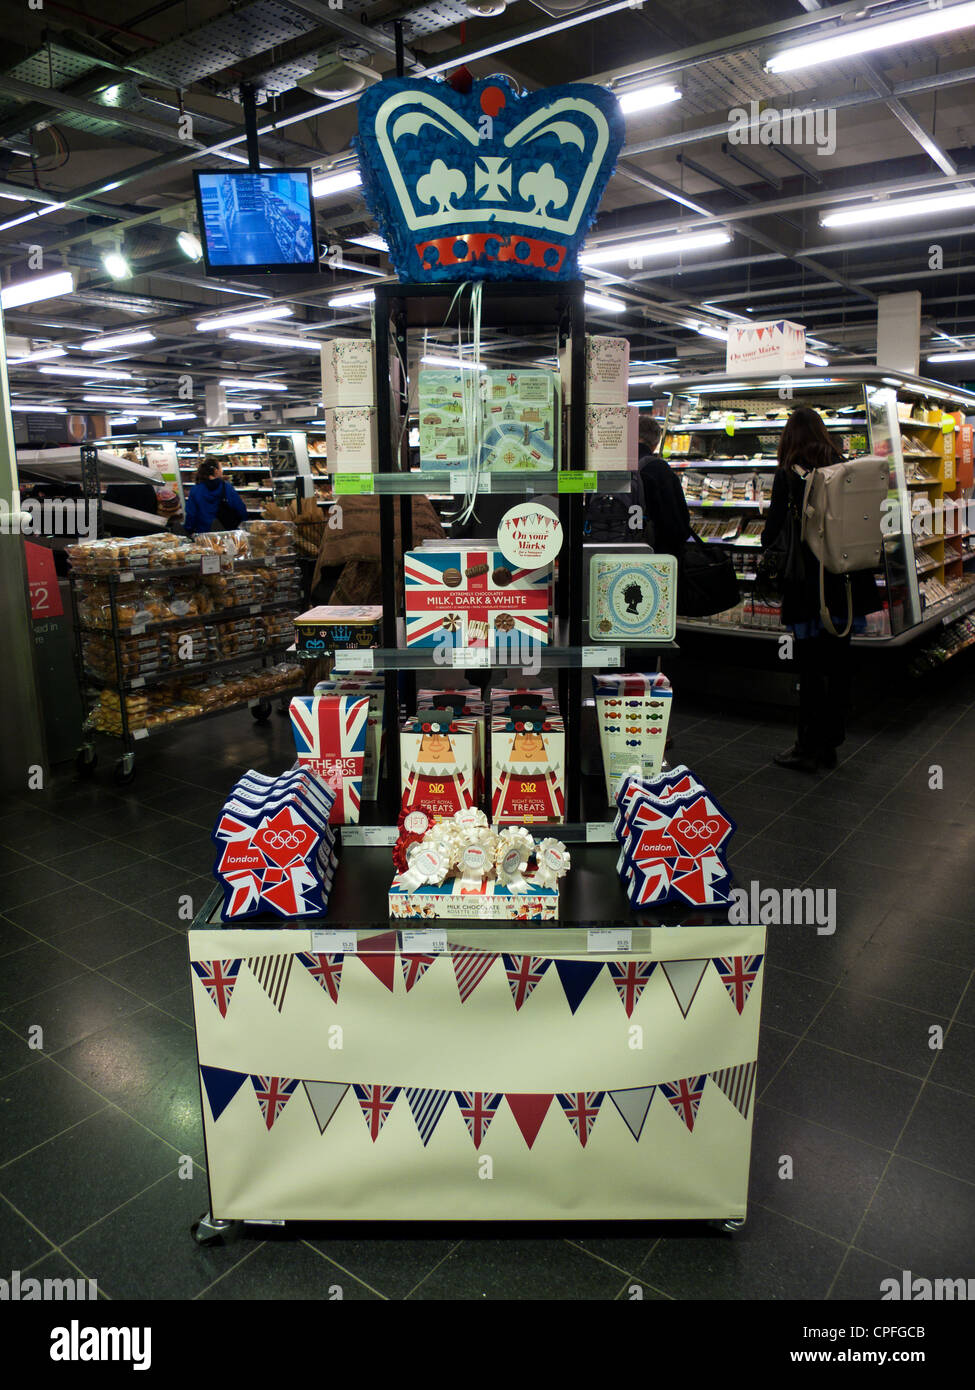 Jubilee shop display High Resolution Stock Photography and Images - Alamy